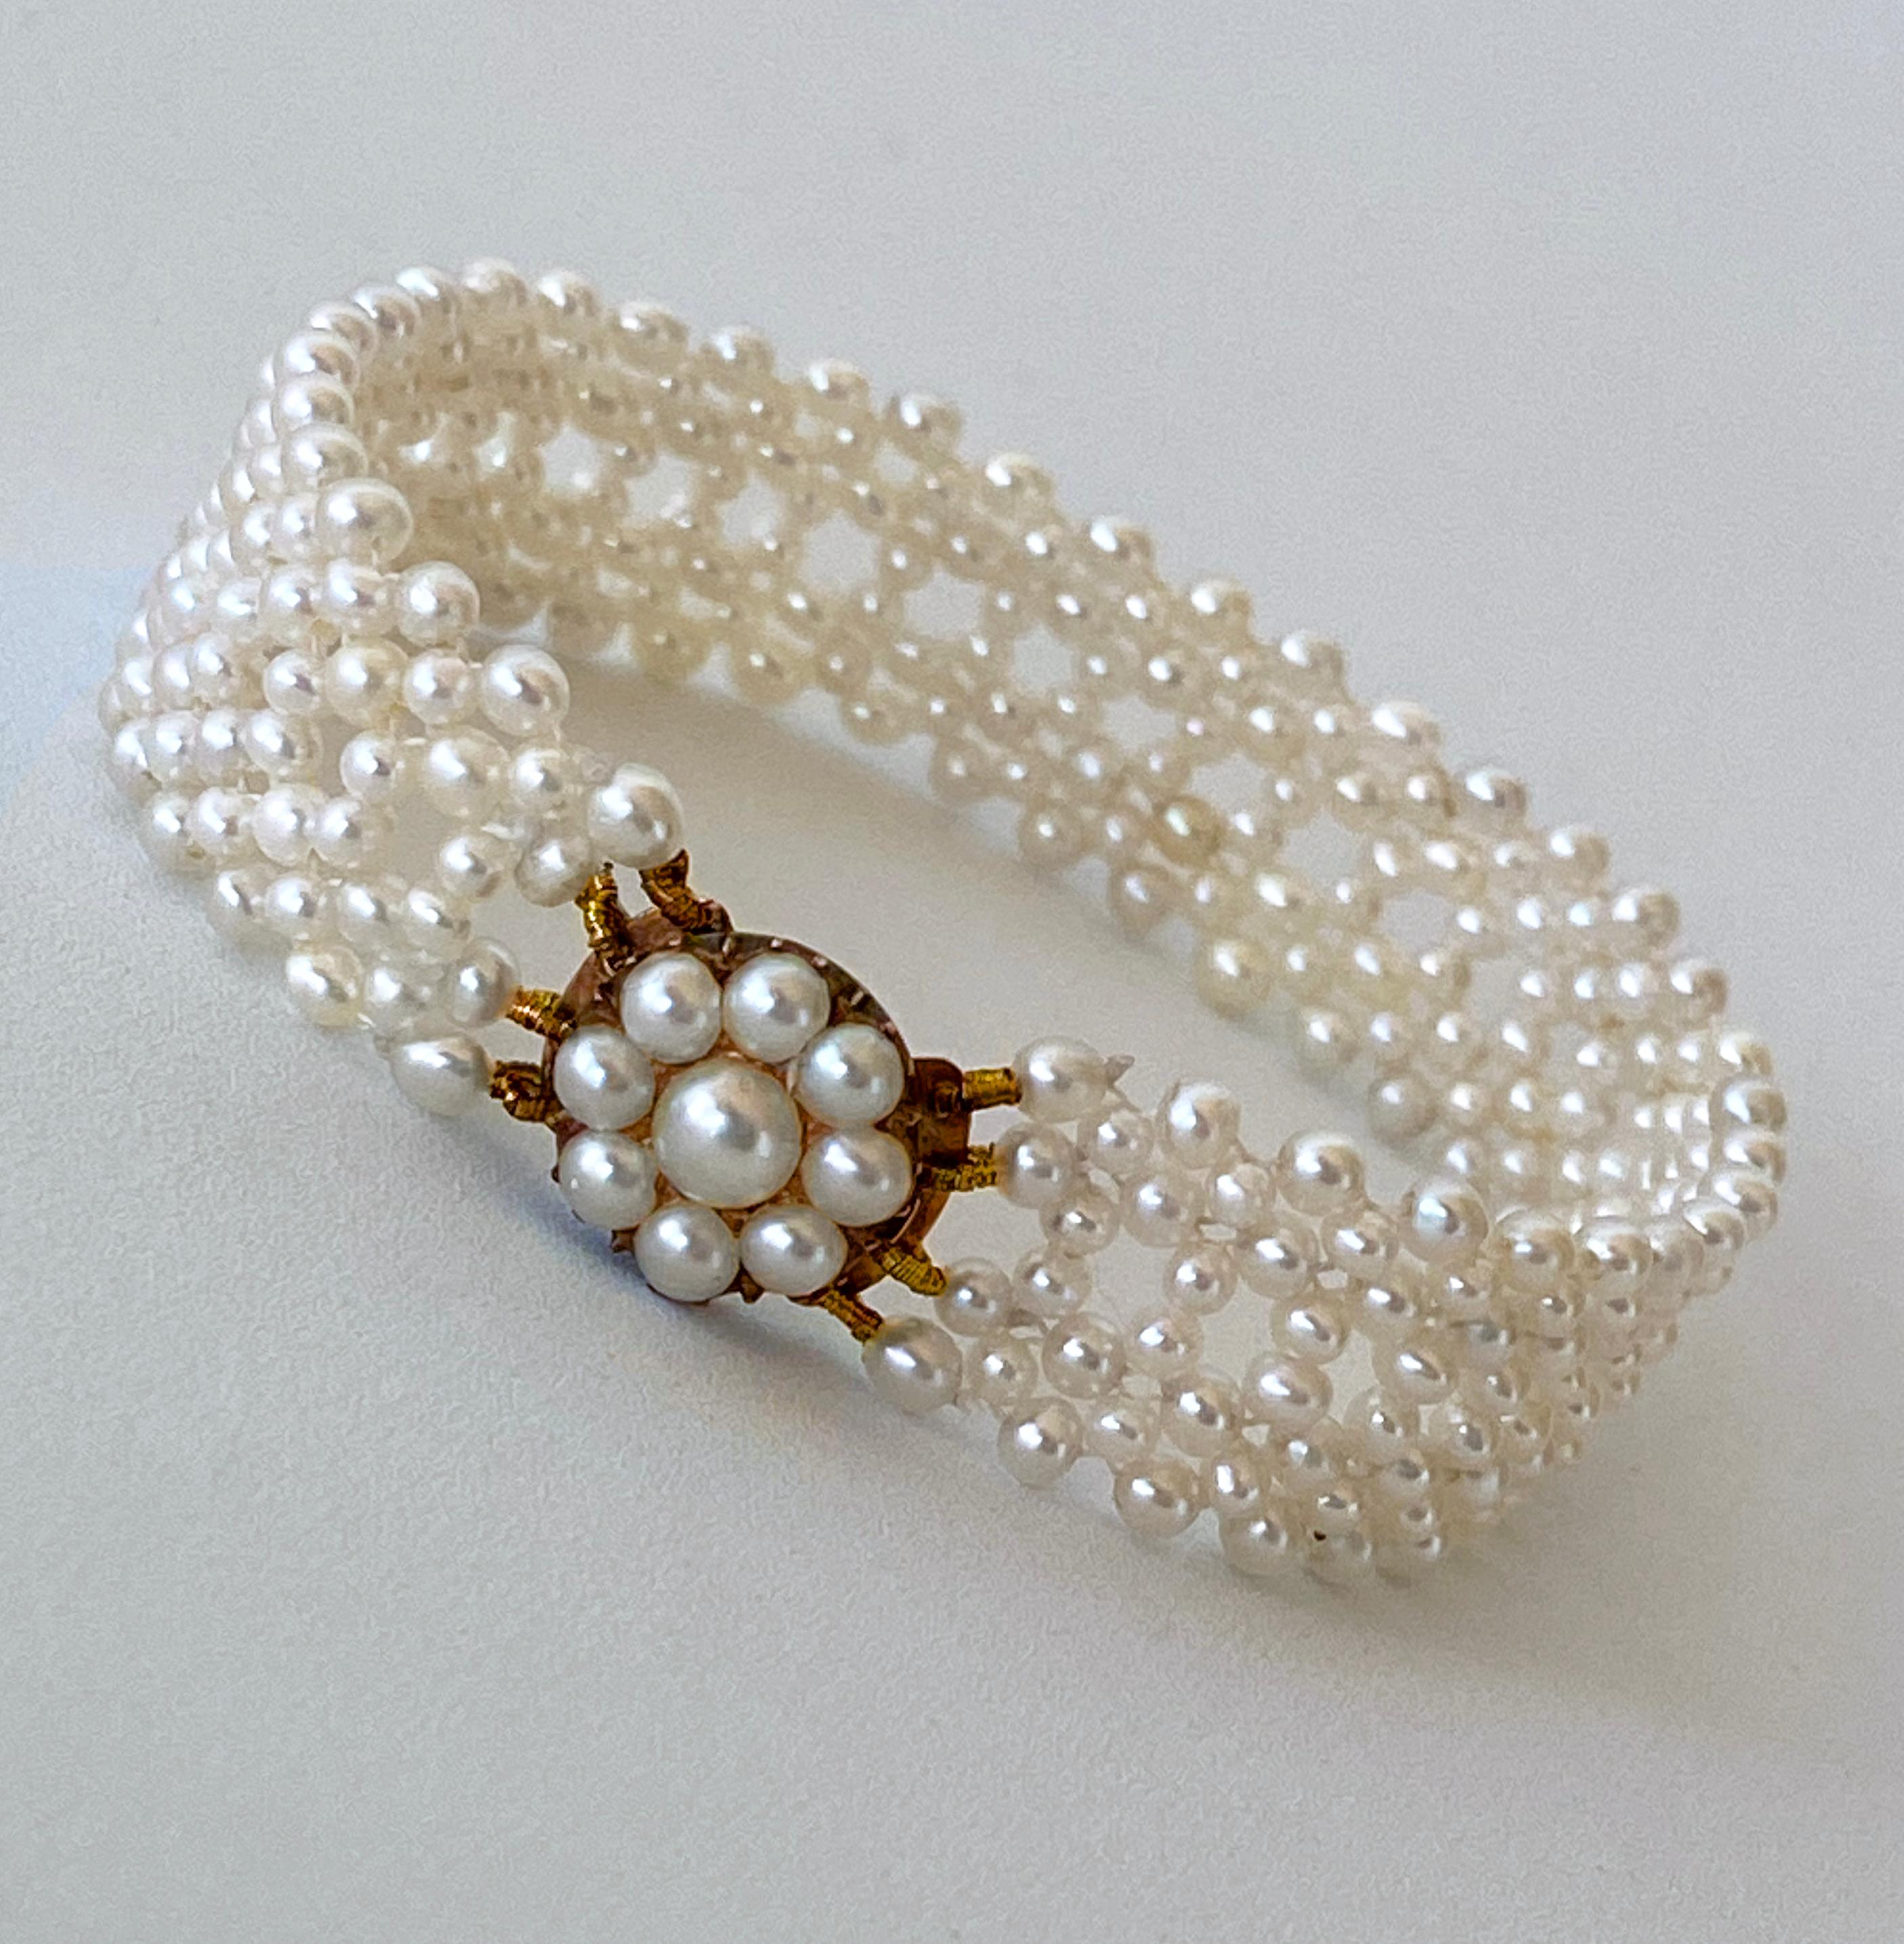 Stunning One of A Kind piece by Marina J. This bracelet features all Antique Pearls intricately woven together into a fine Lace like design. The elegance of this bracelet is heightened by the Vintage Original Pearl Centerpiece, which doubles as the